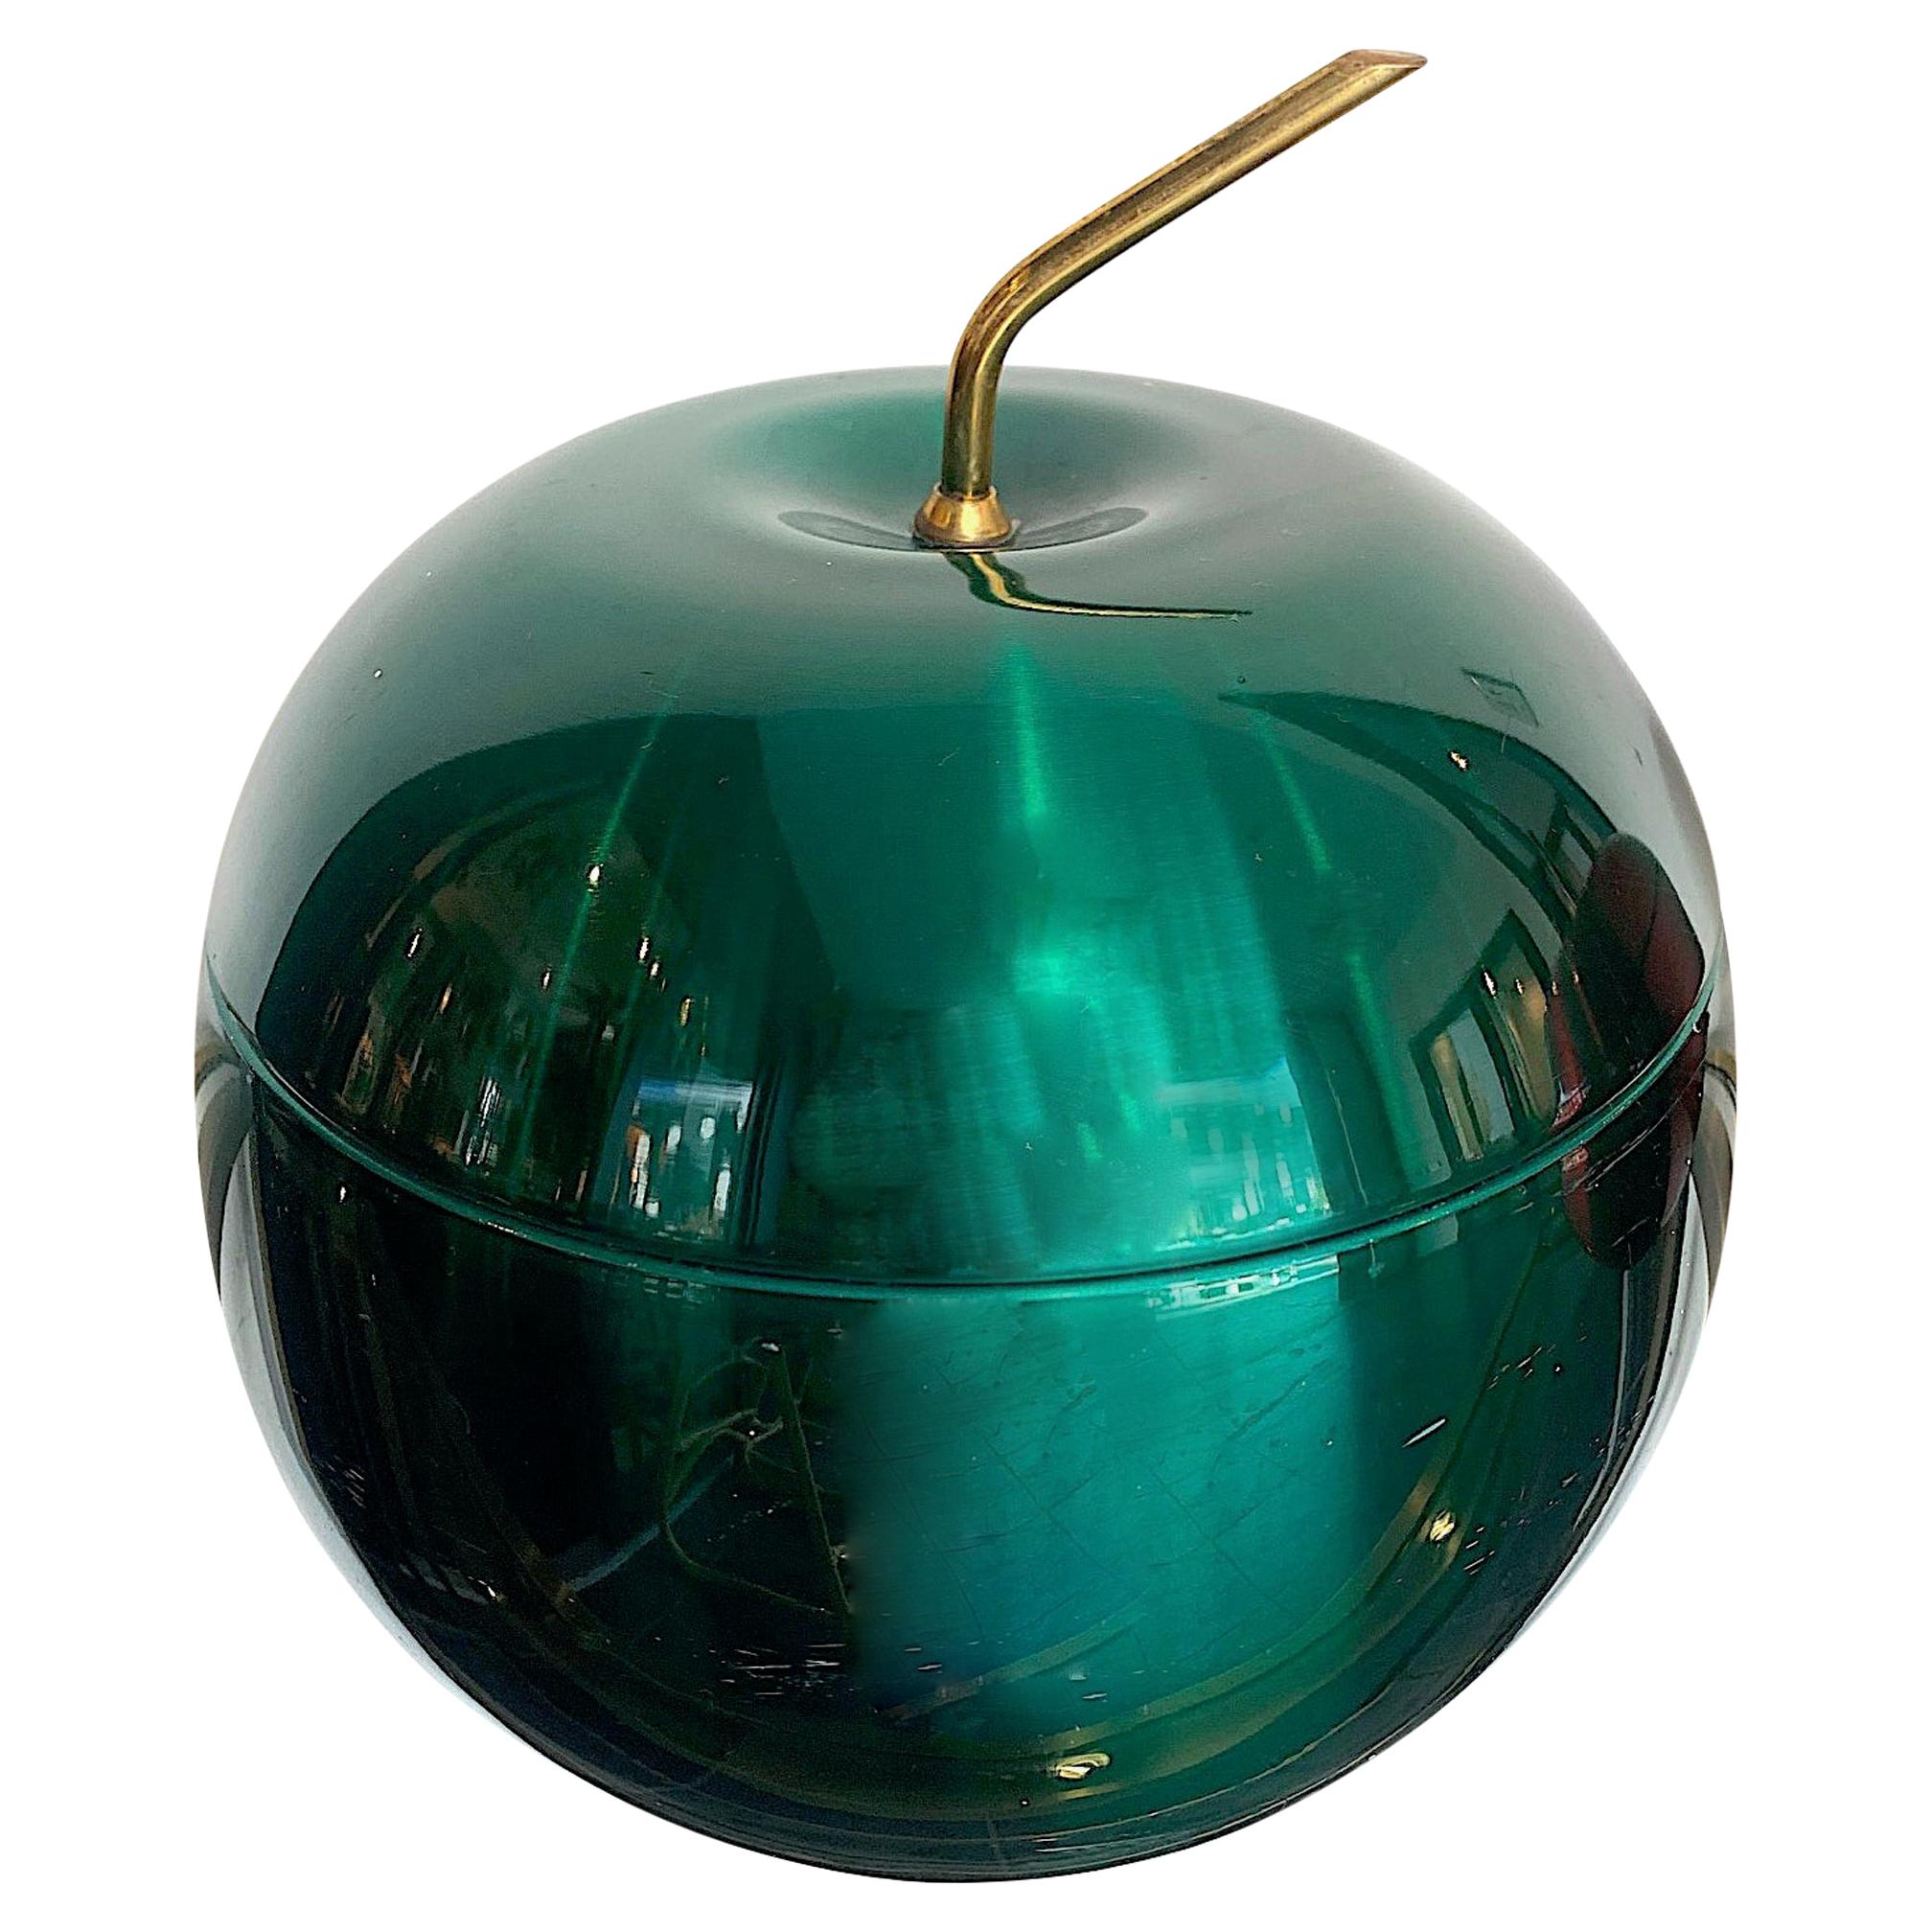 1970s Apple Ice Bucket by Daydream in Anodised Vibrant Green with Brass Handle